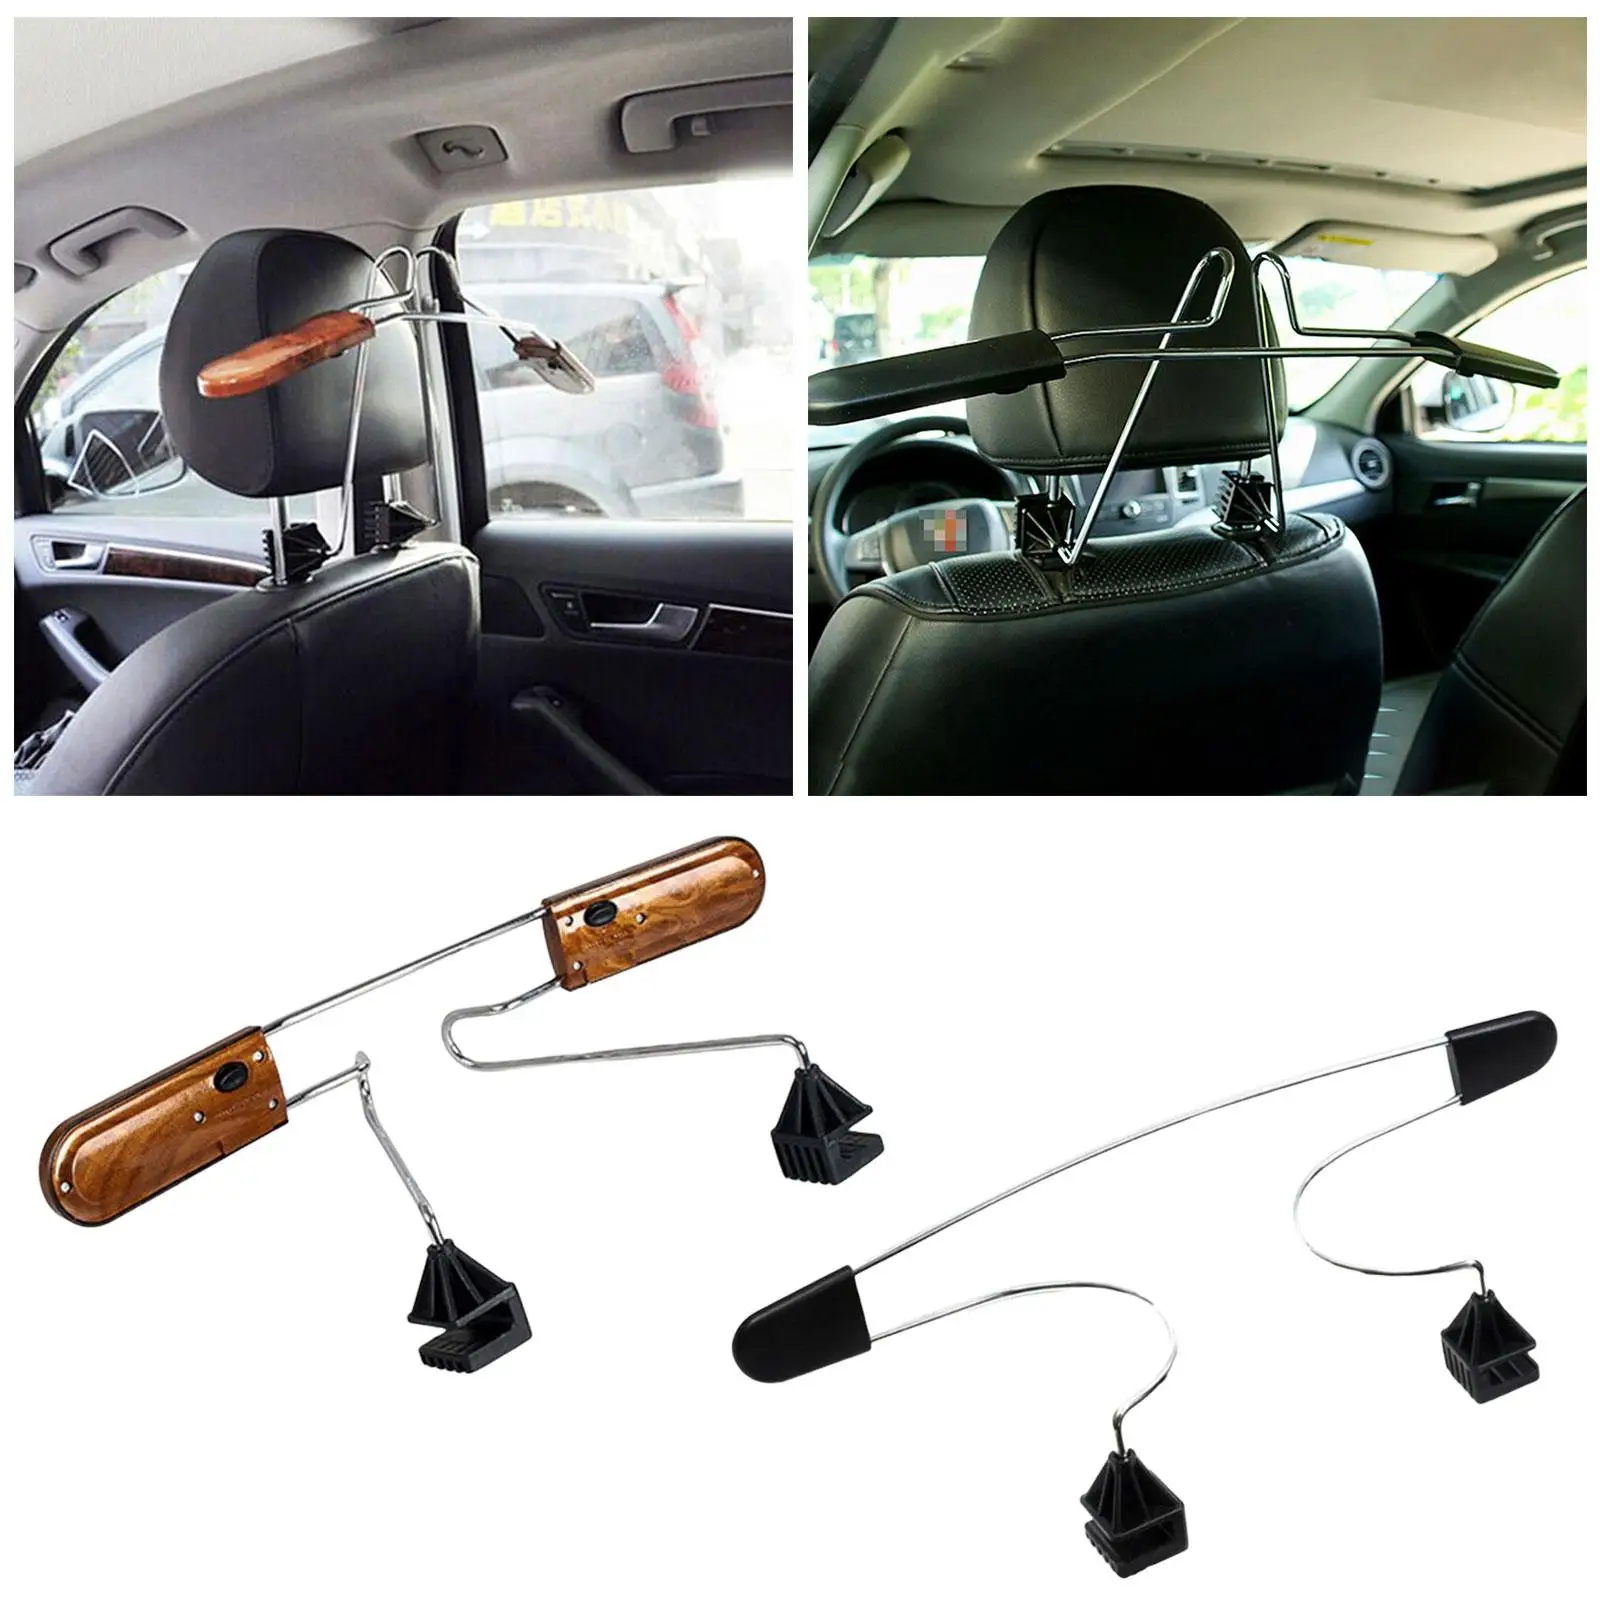 Adjustable Vehicle Car Jacket Suit Coat Hanger ,Easy to Assemble and Install